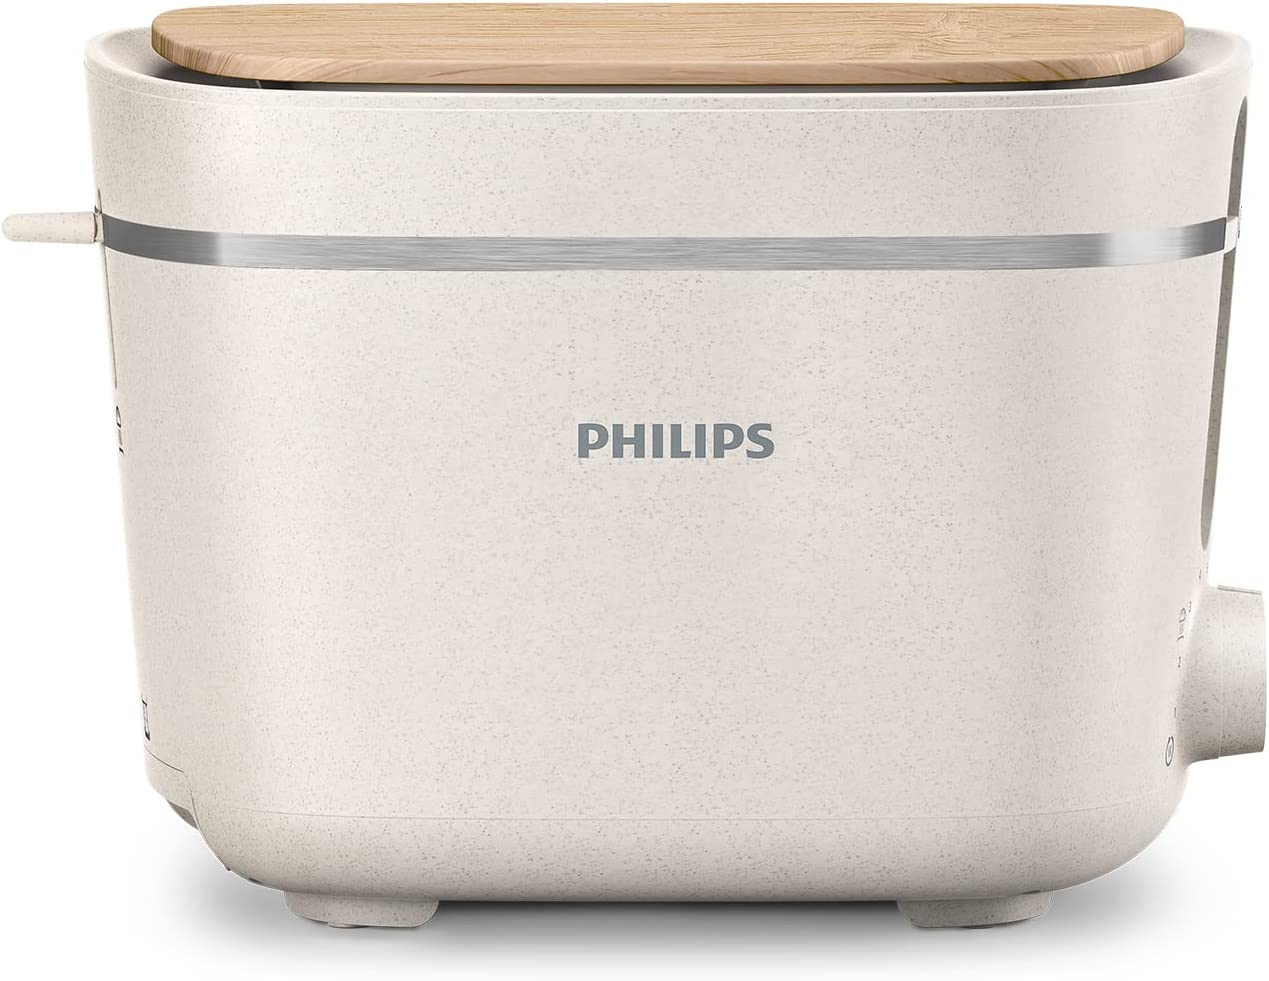 Philips Domestic Appliances Philips HD2640/10 Conscious Collection Organic 100% Recycled Plastic Toaster, 8 Levels of Browning, Cream